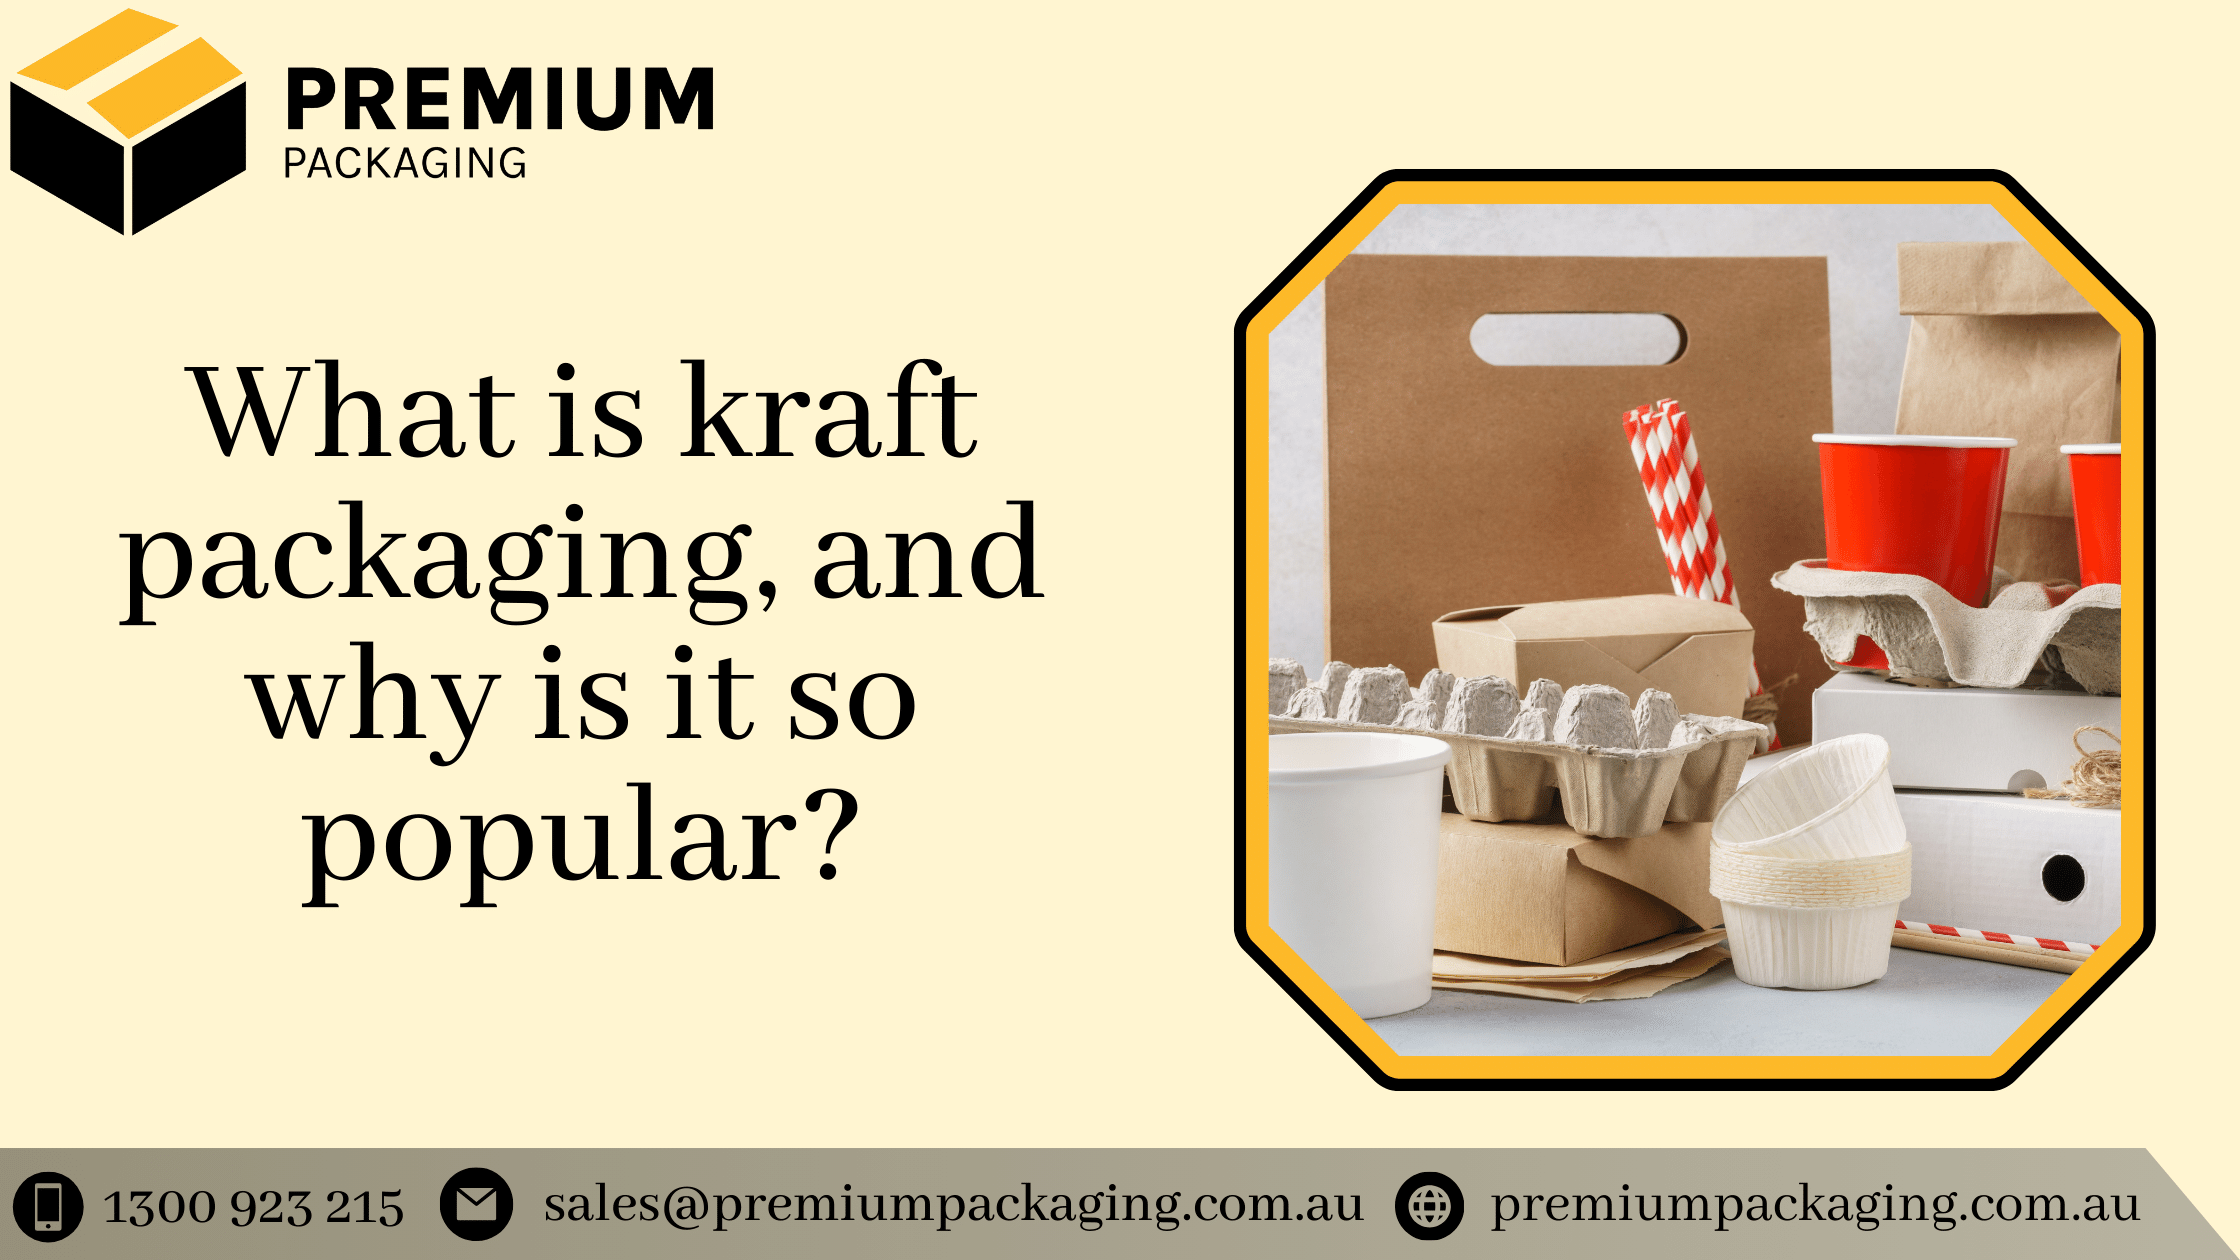 What is kraft packaging, and why is it so popular?